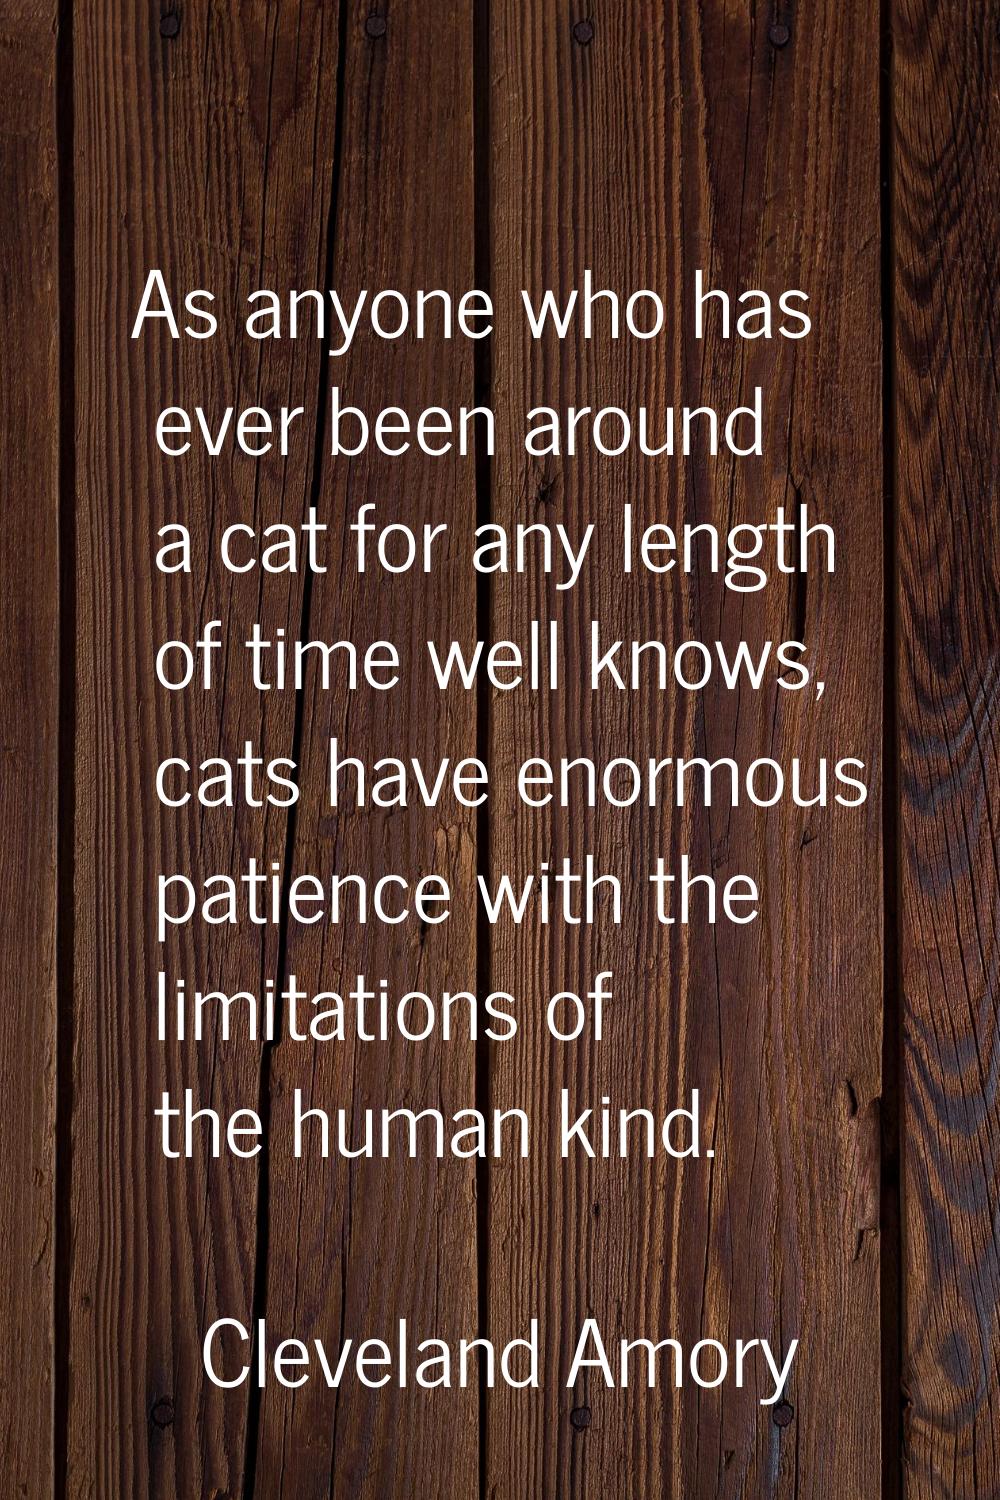 As anyone who has ever been around a cat for any length of time well knows, cats have enormous pati